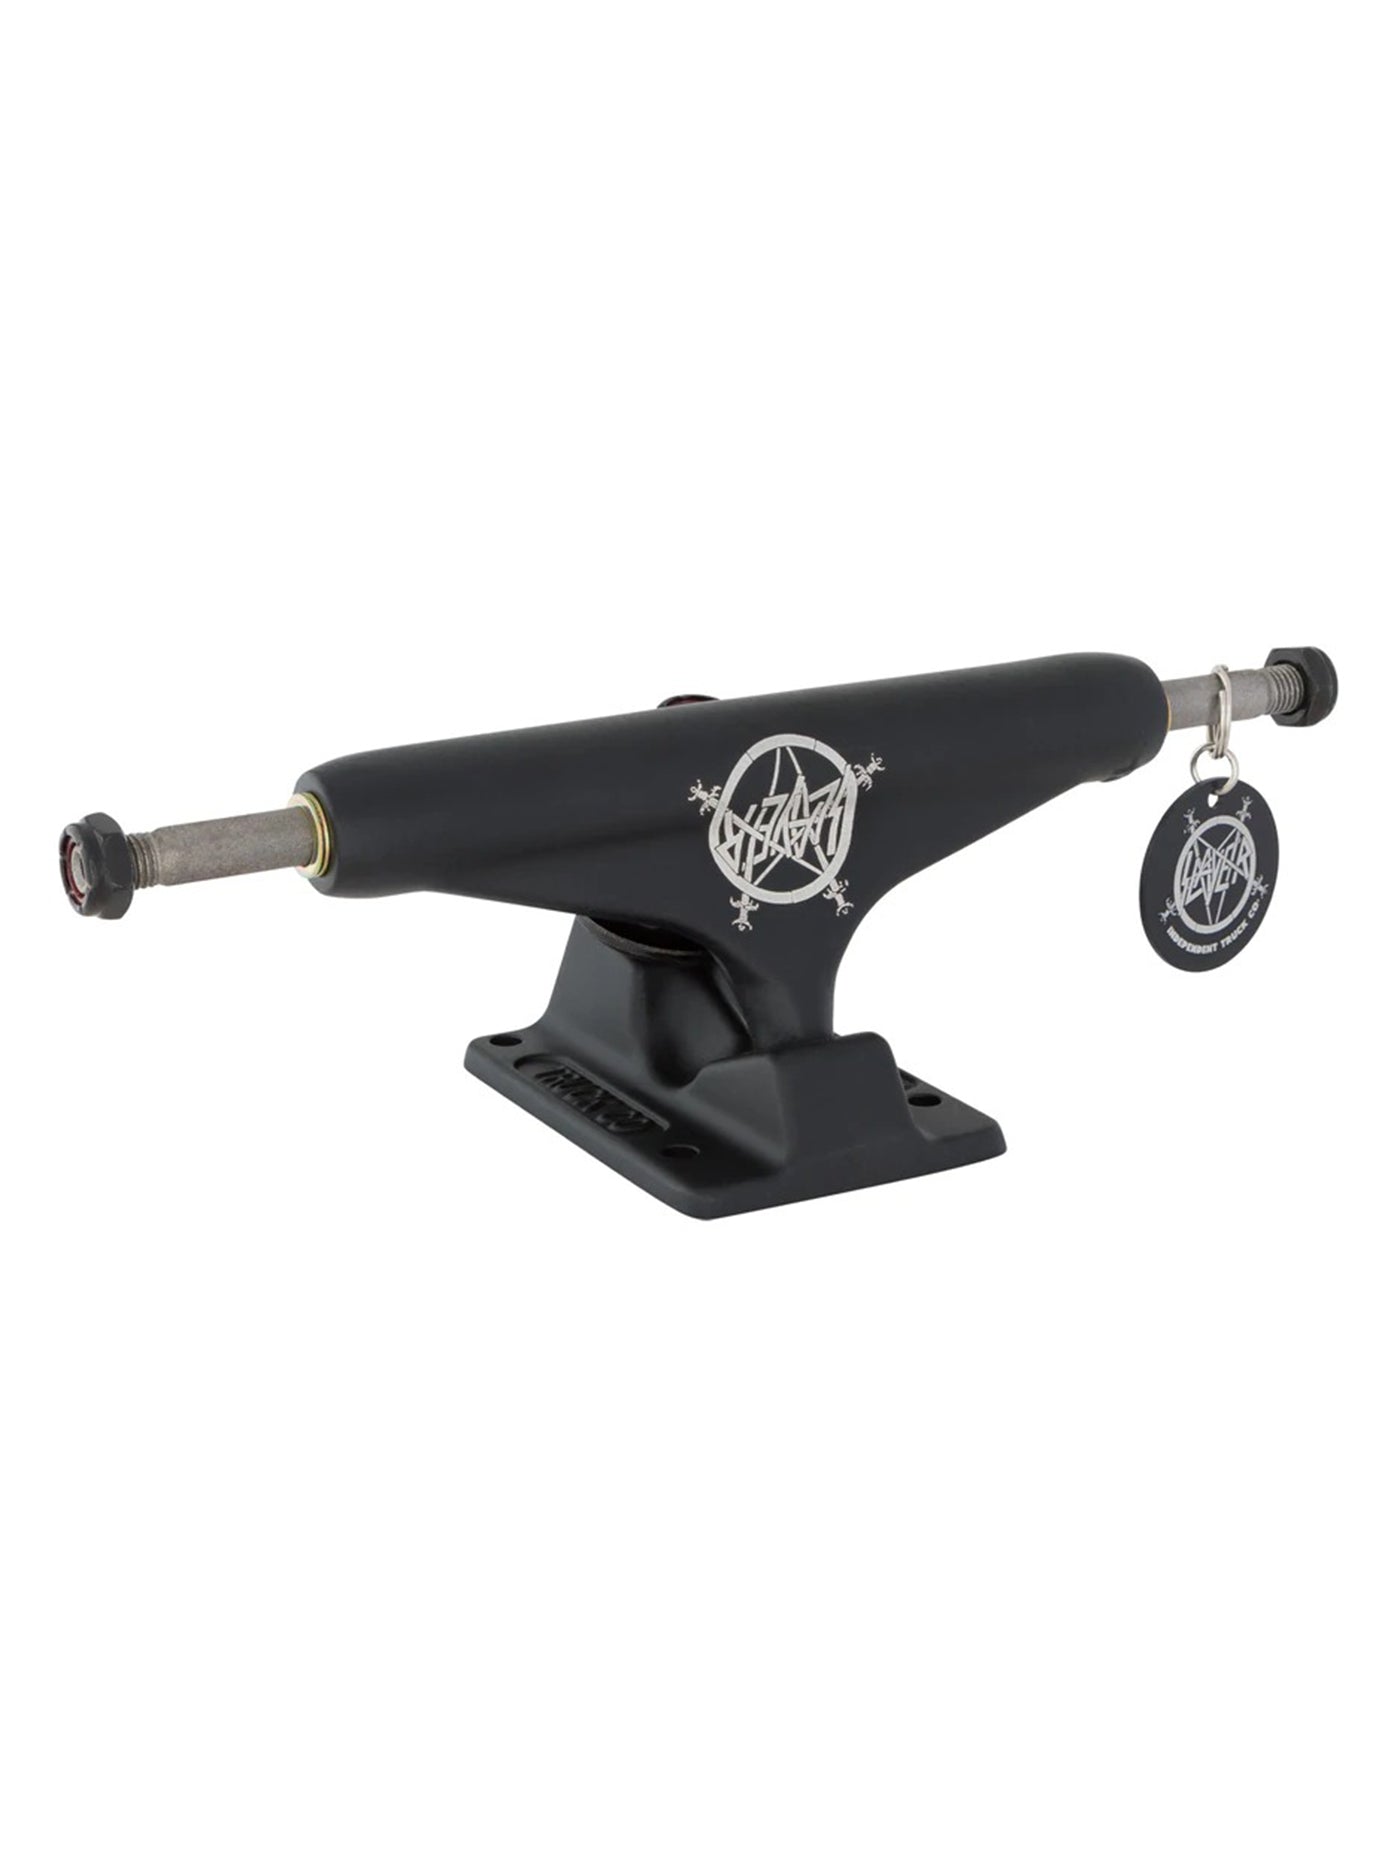 Independant Forged Hollow Stage XI 144 MM Trucks